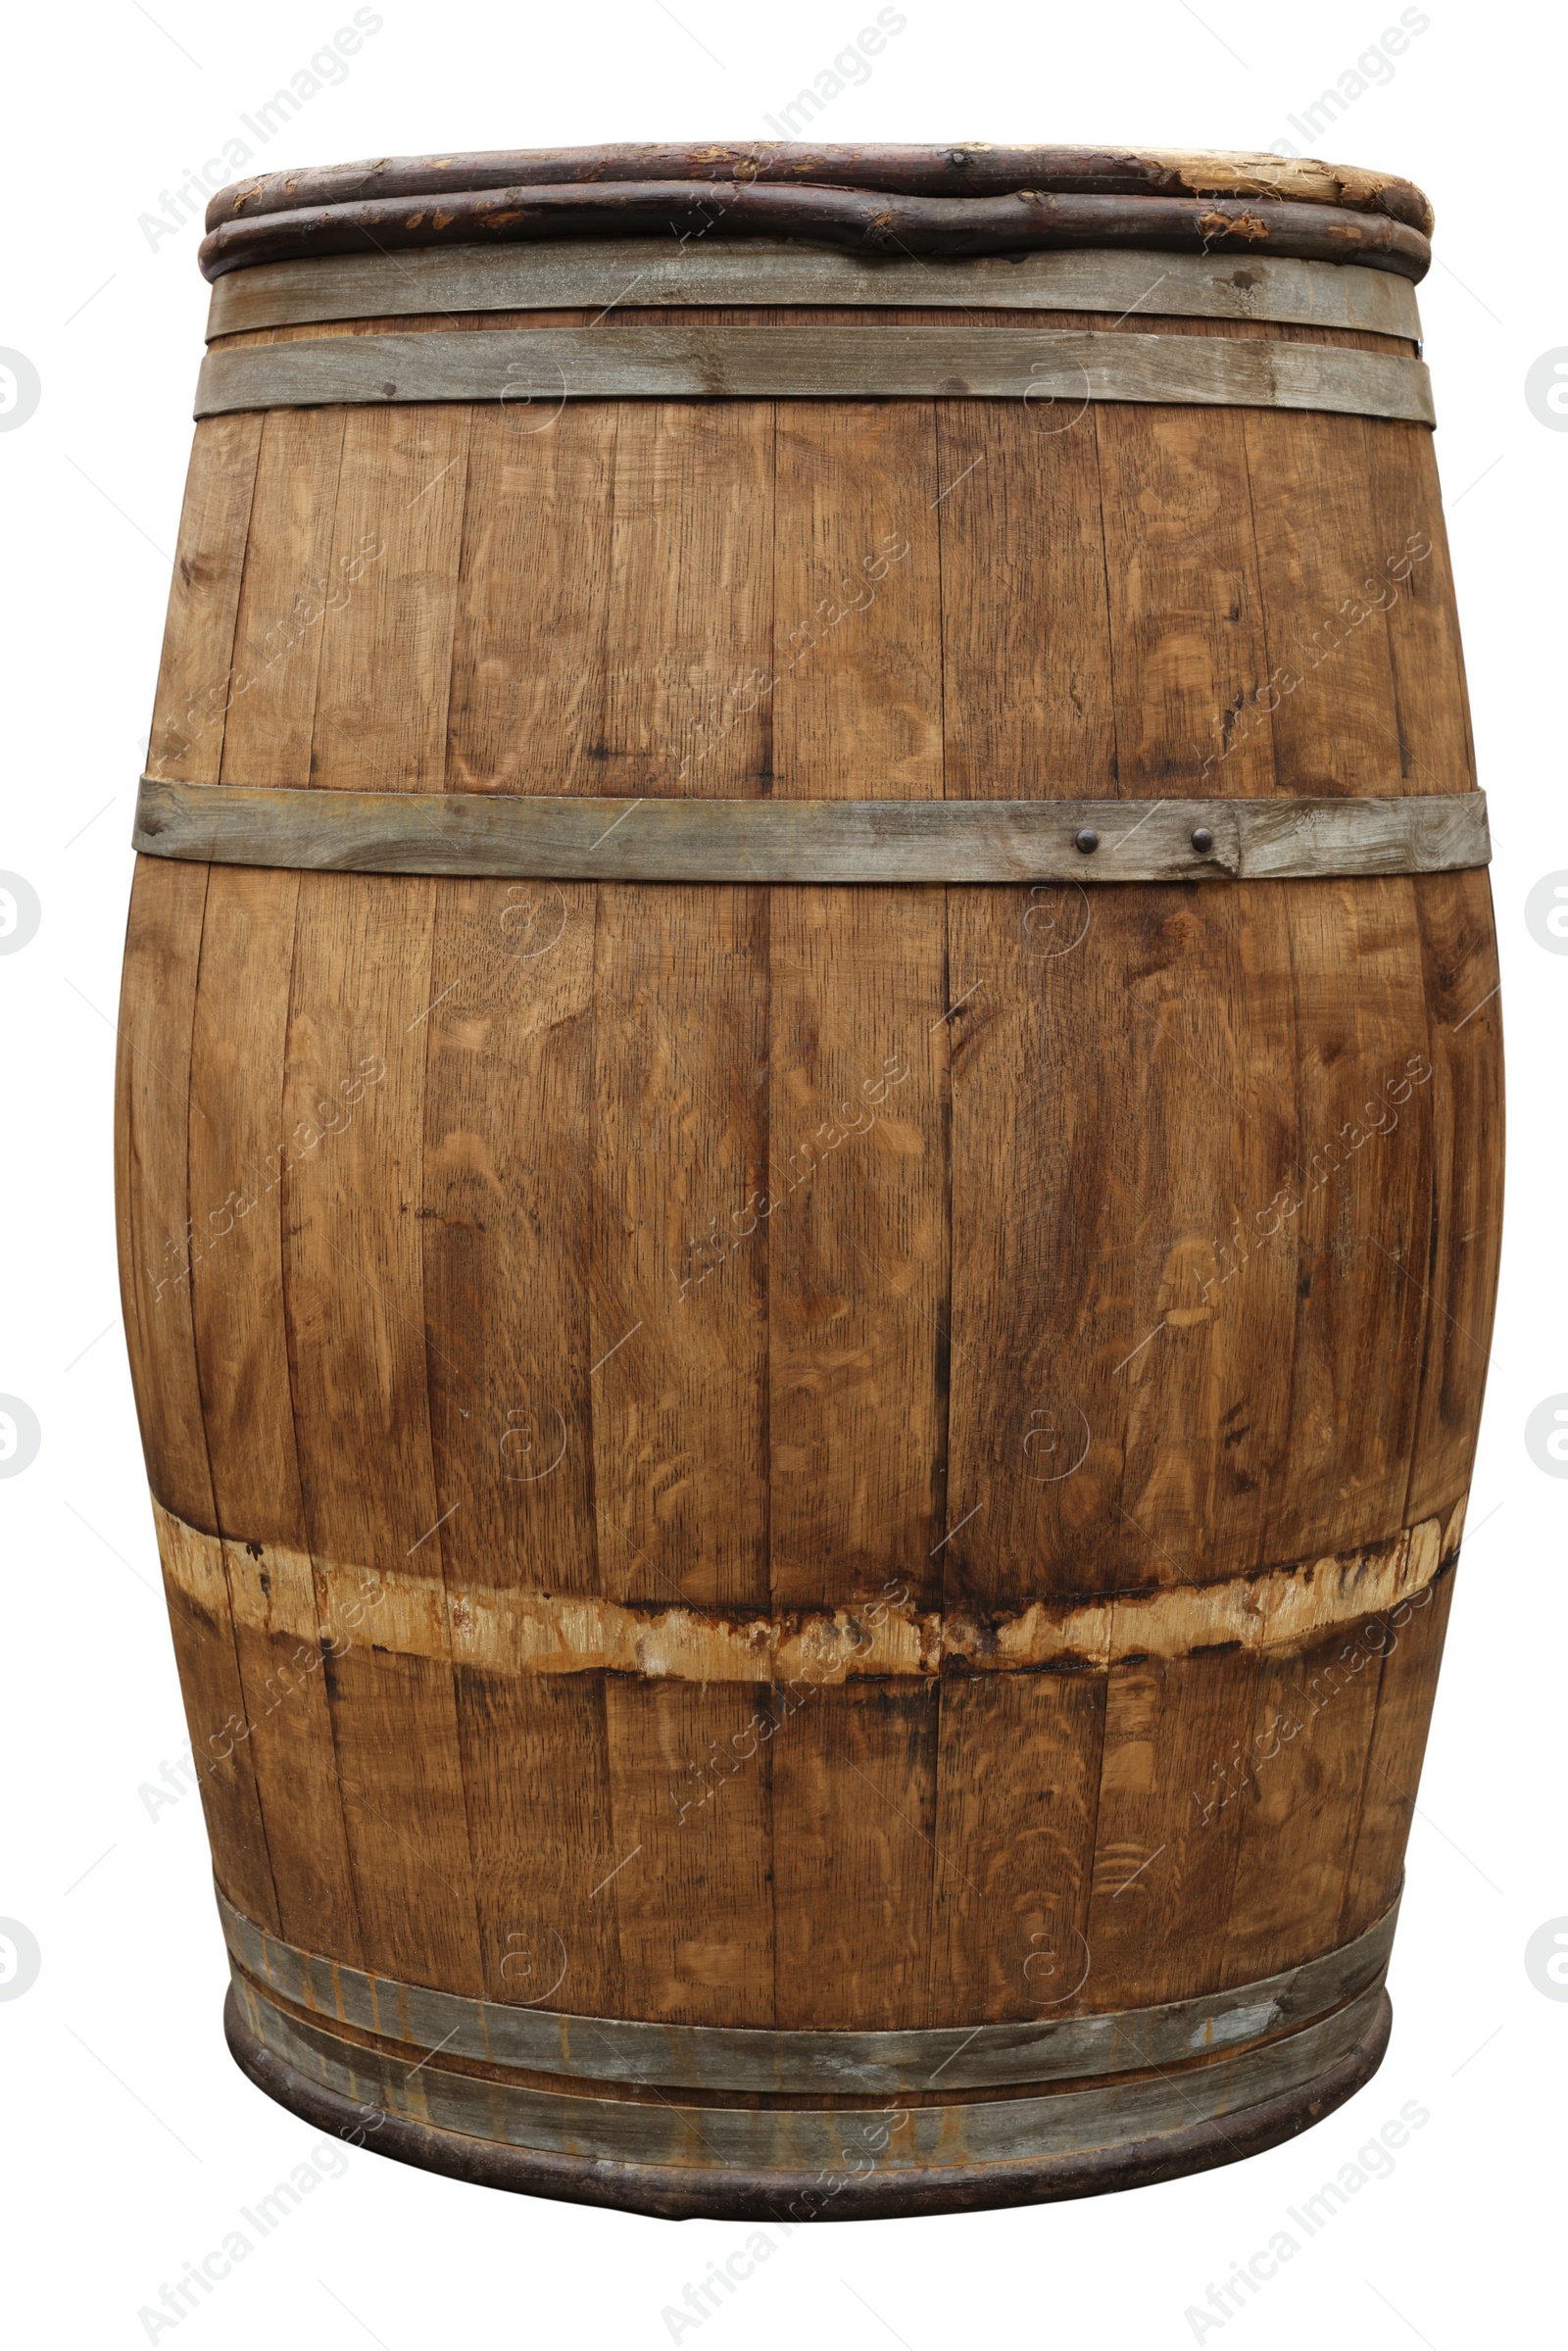 Image of One wooden barrel with metal hoops isolated on white